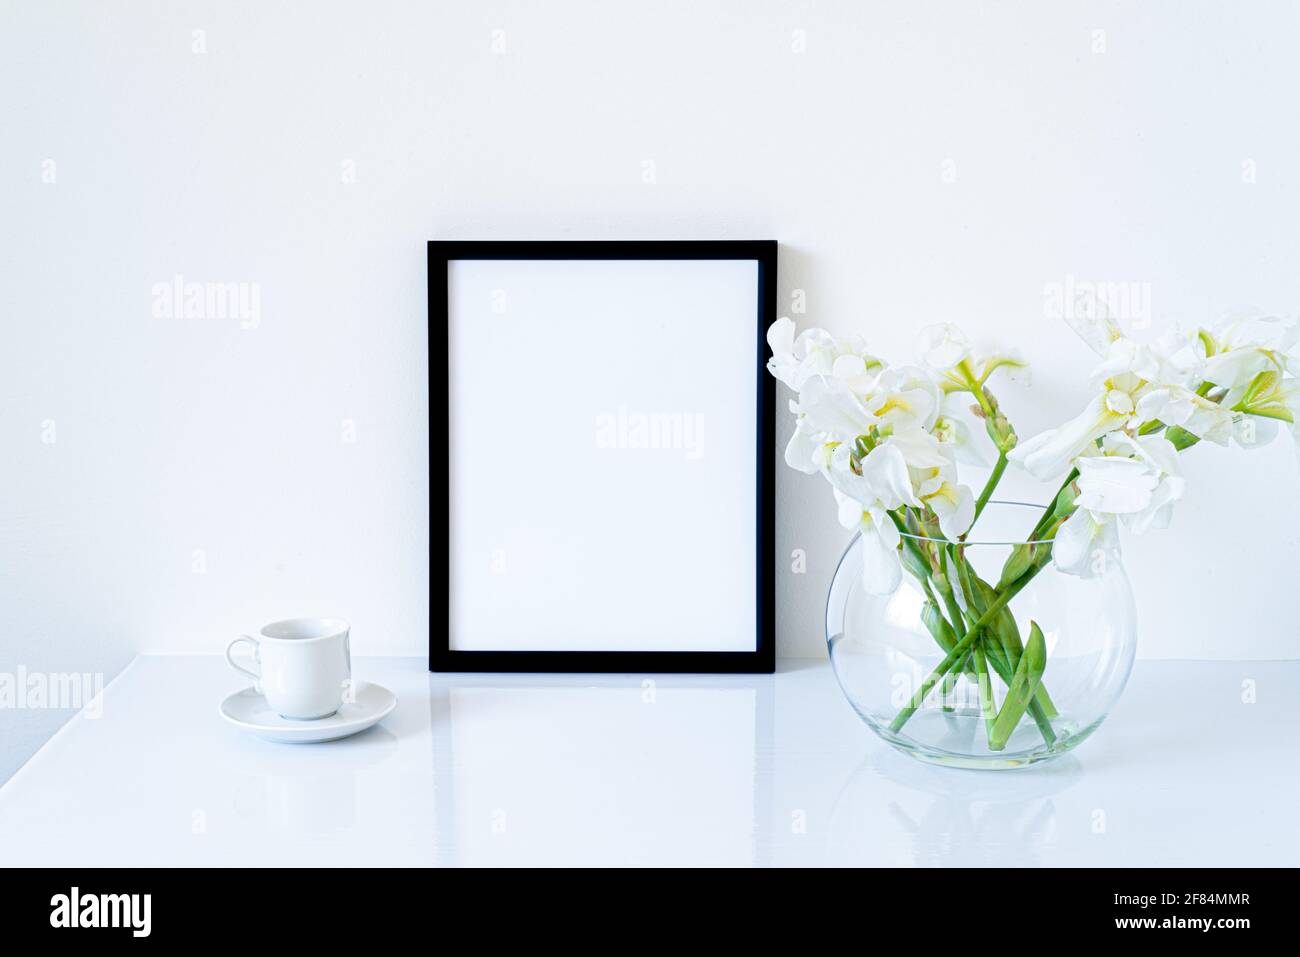 Blank black frame mockup. Fresh flowers of white irises in glass vase in the shape of a sphere on a white table and coffee cup. White background, mini Stock Photo